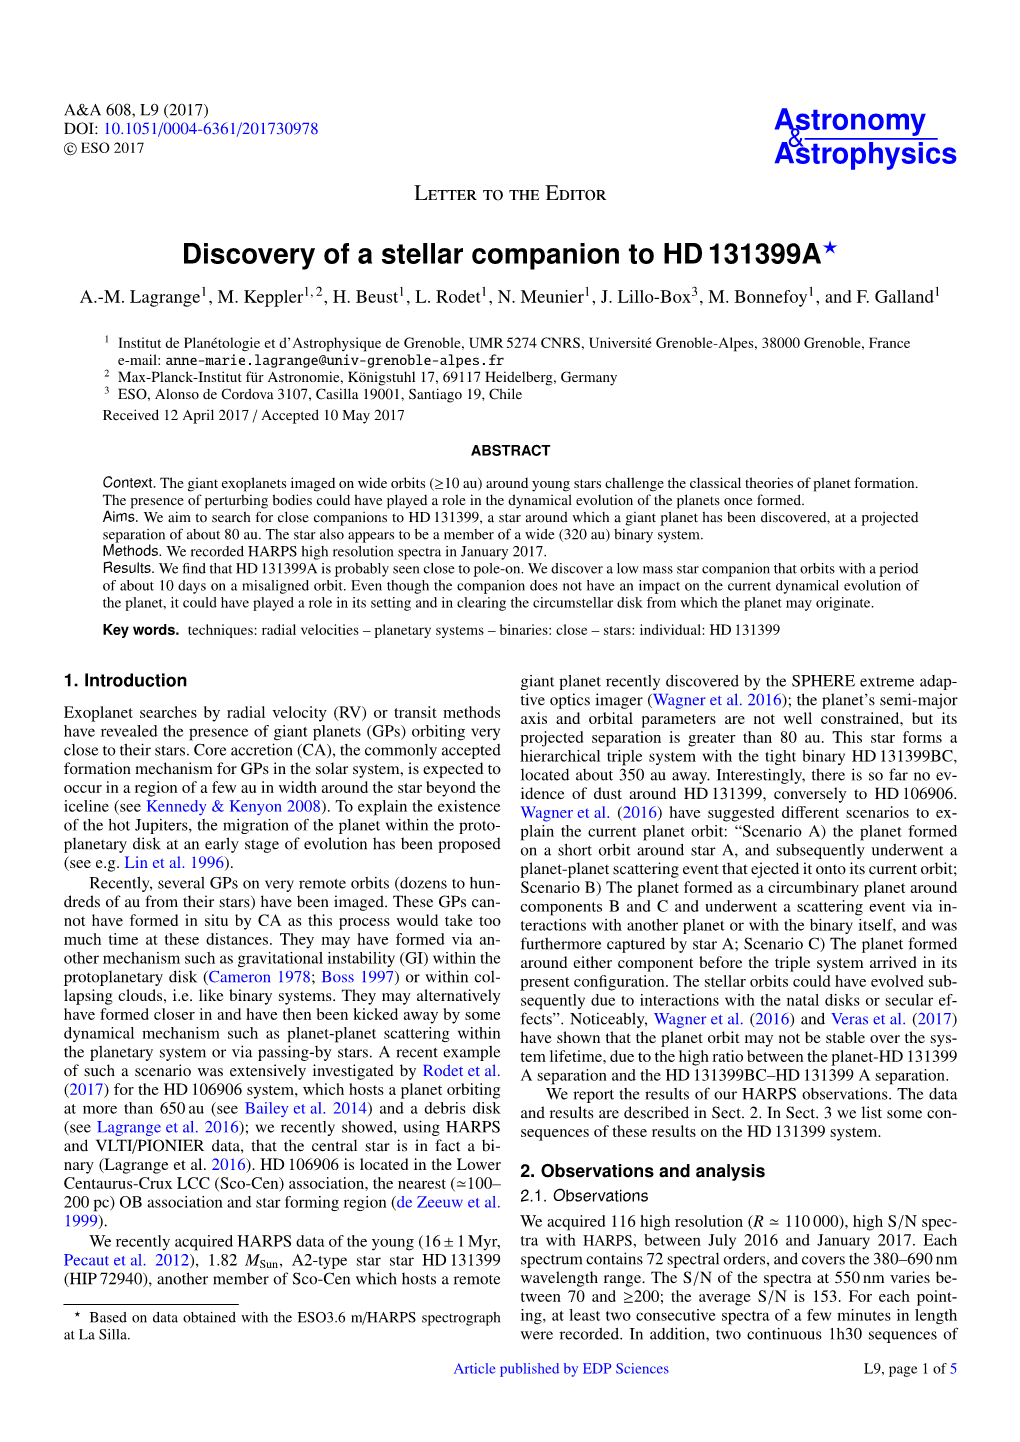 Discovery of a Stellar Companion to HD 131399A? A.-M